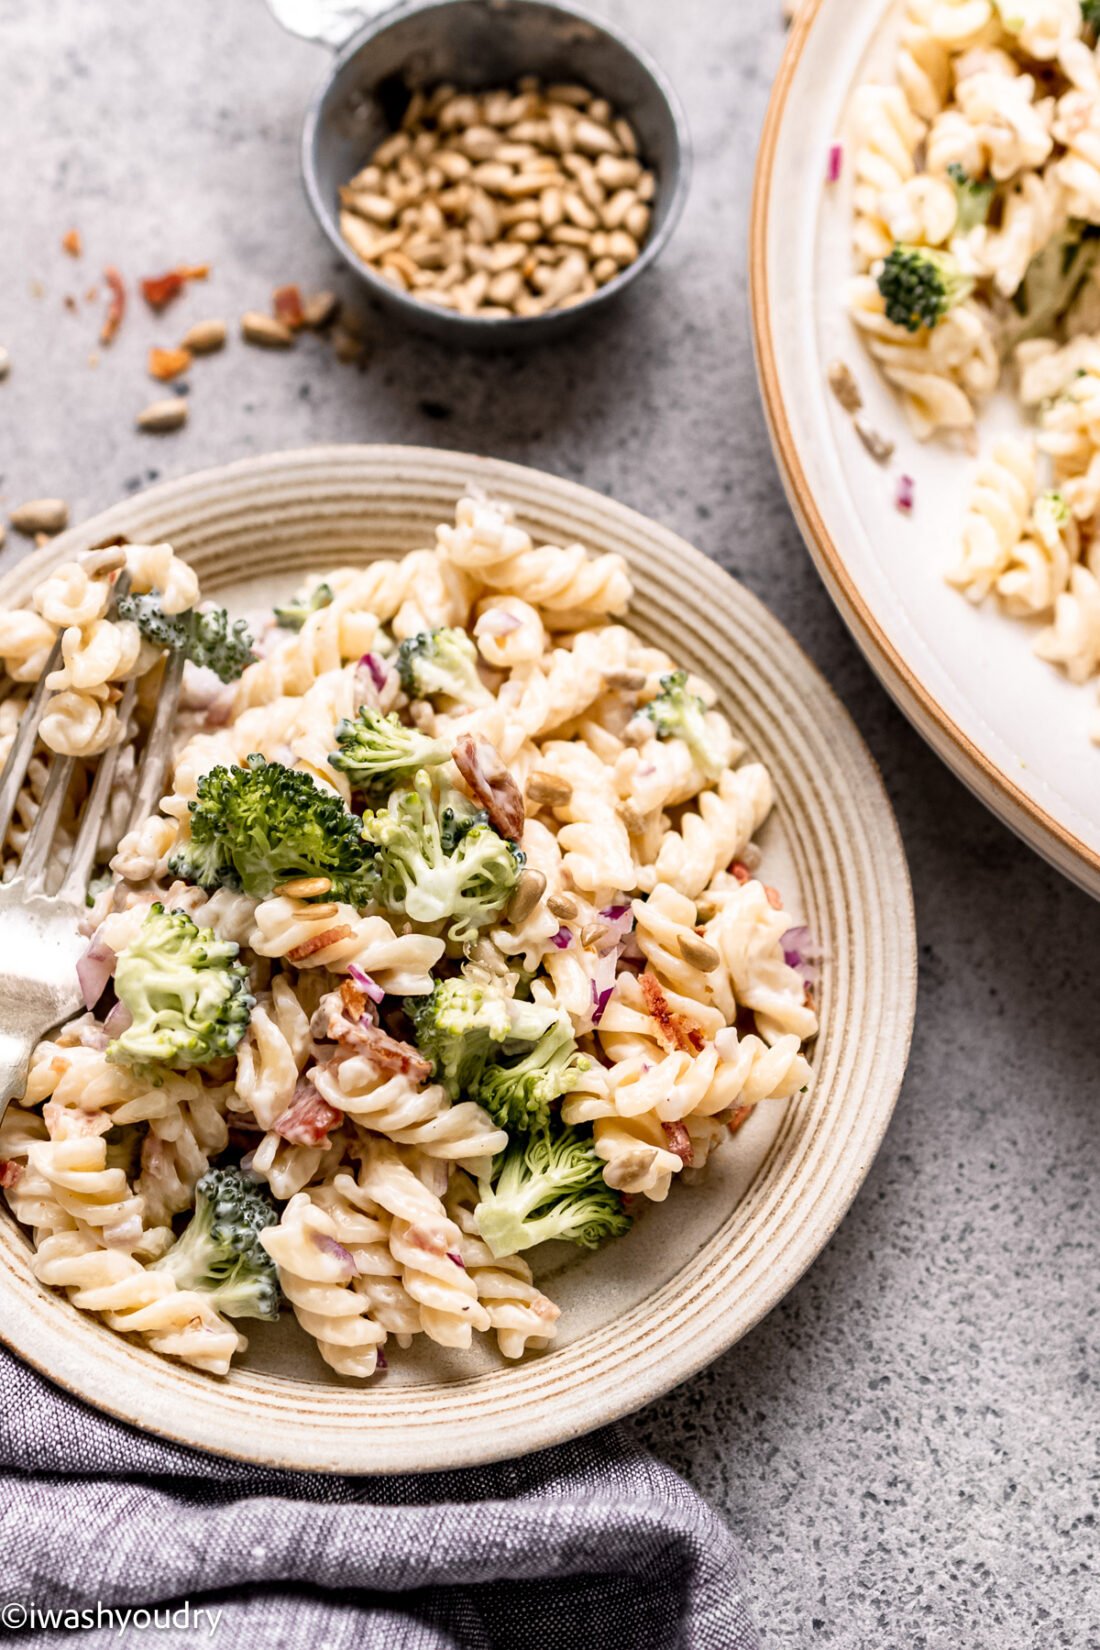 plate of pasta salad with sunflower seeds, bacon and broccoli.